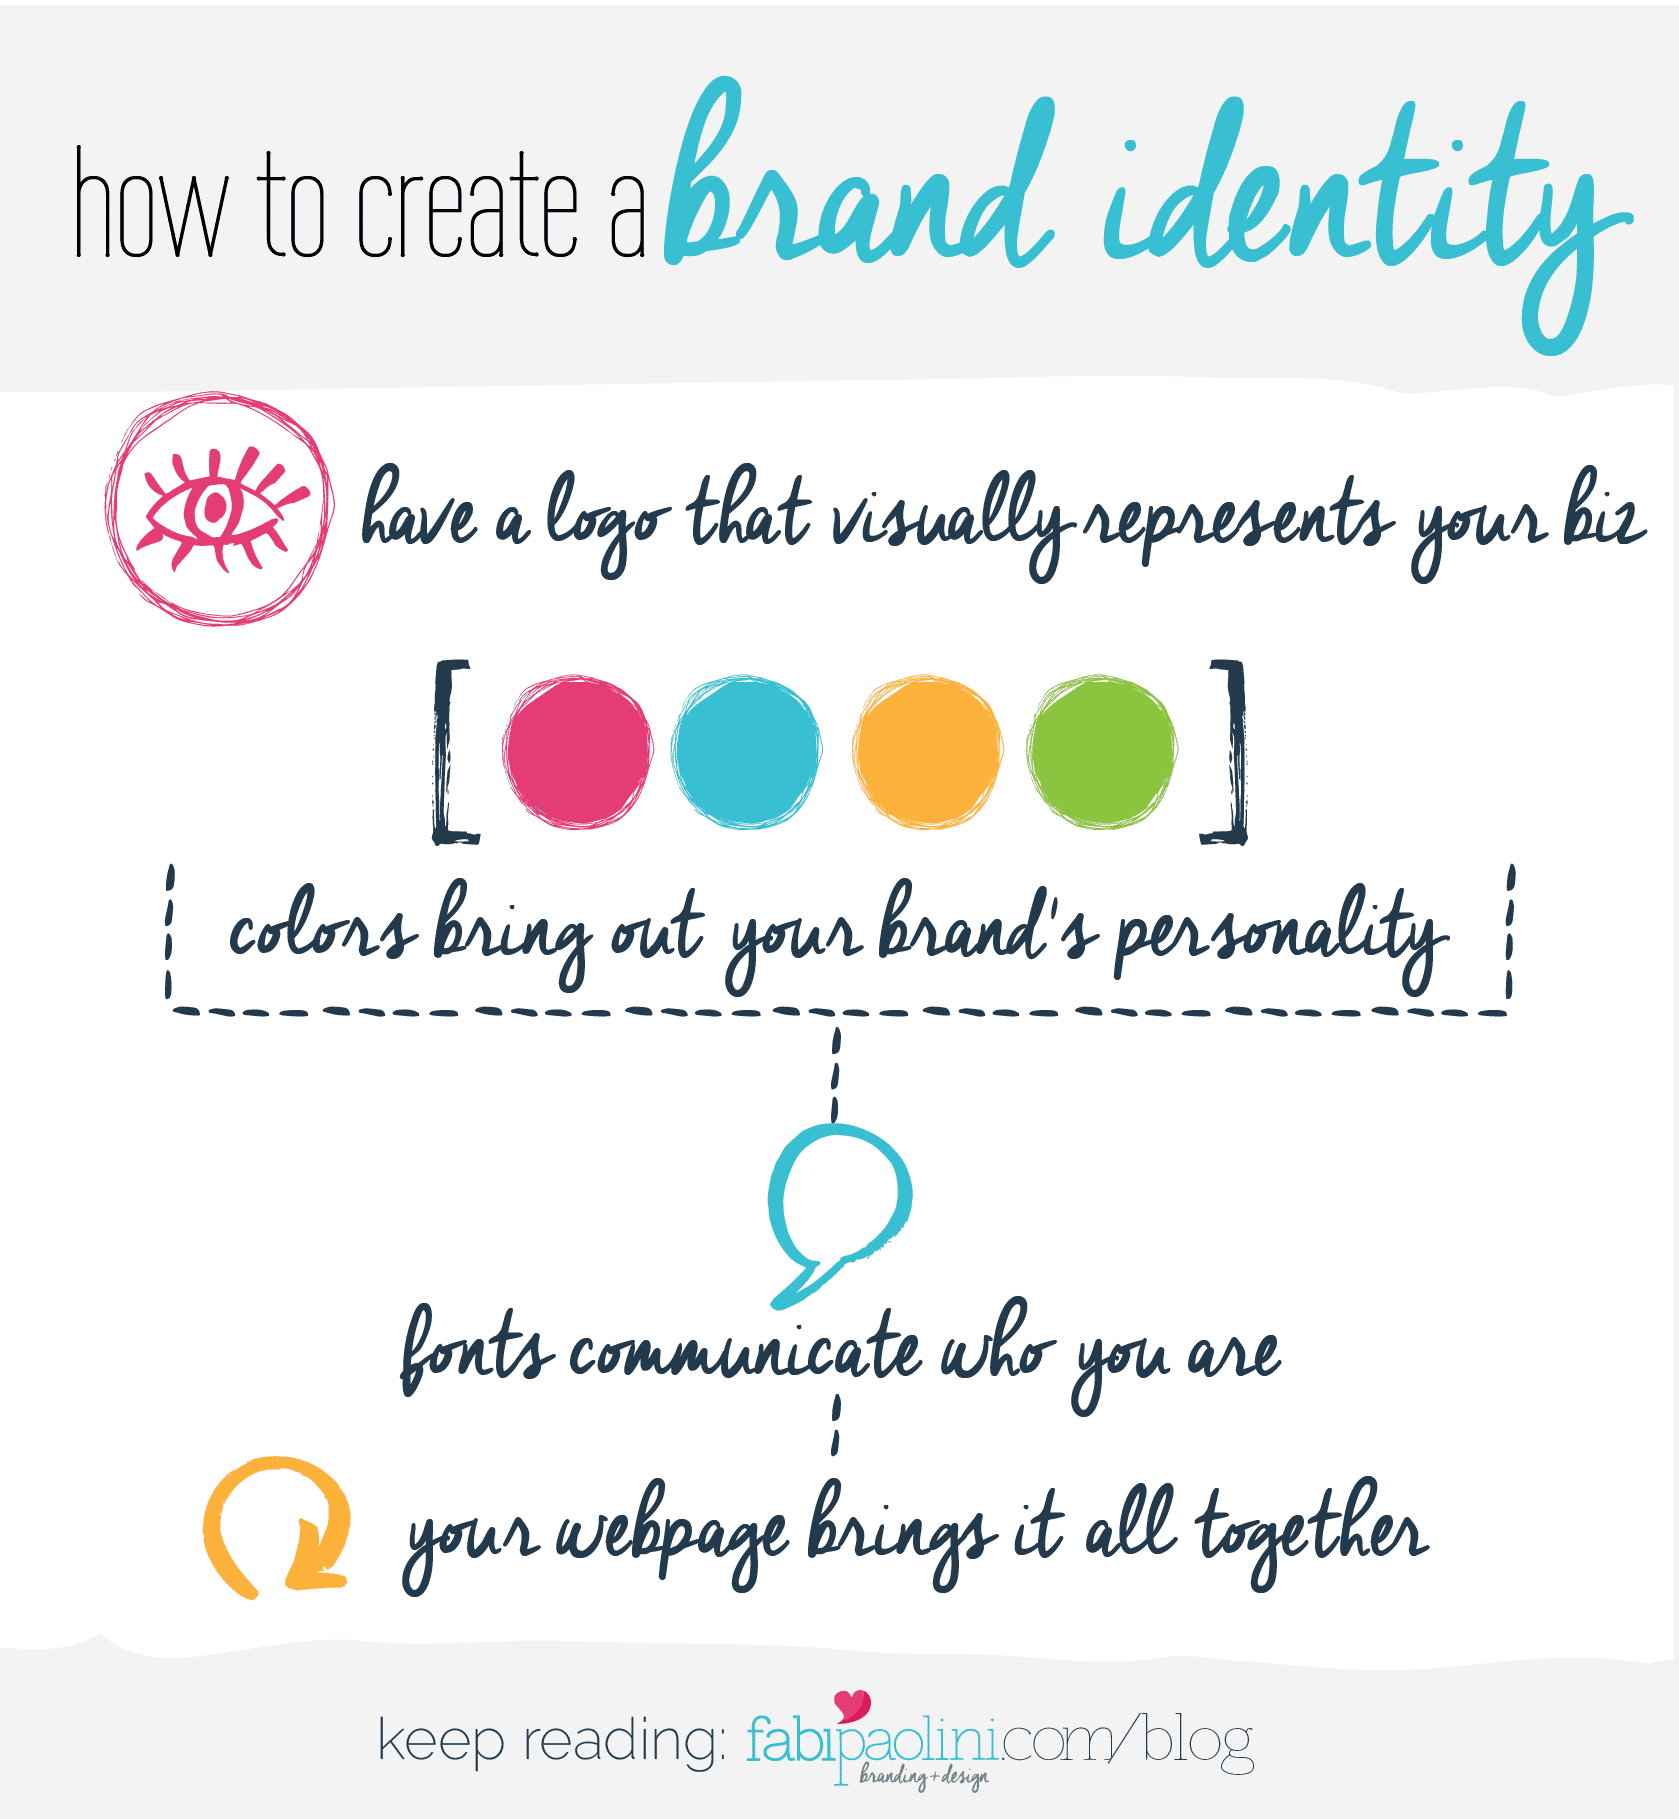 How to Brand Your Business. Branding + business tips and advice. Brand identity. How to choose a logo design, colors and fonts. Free branding guide inside